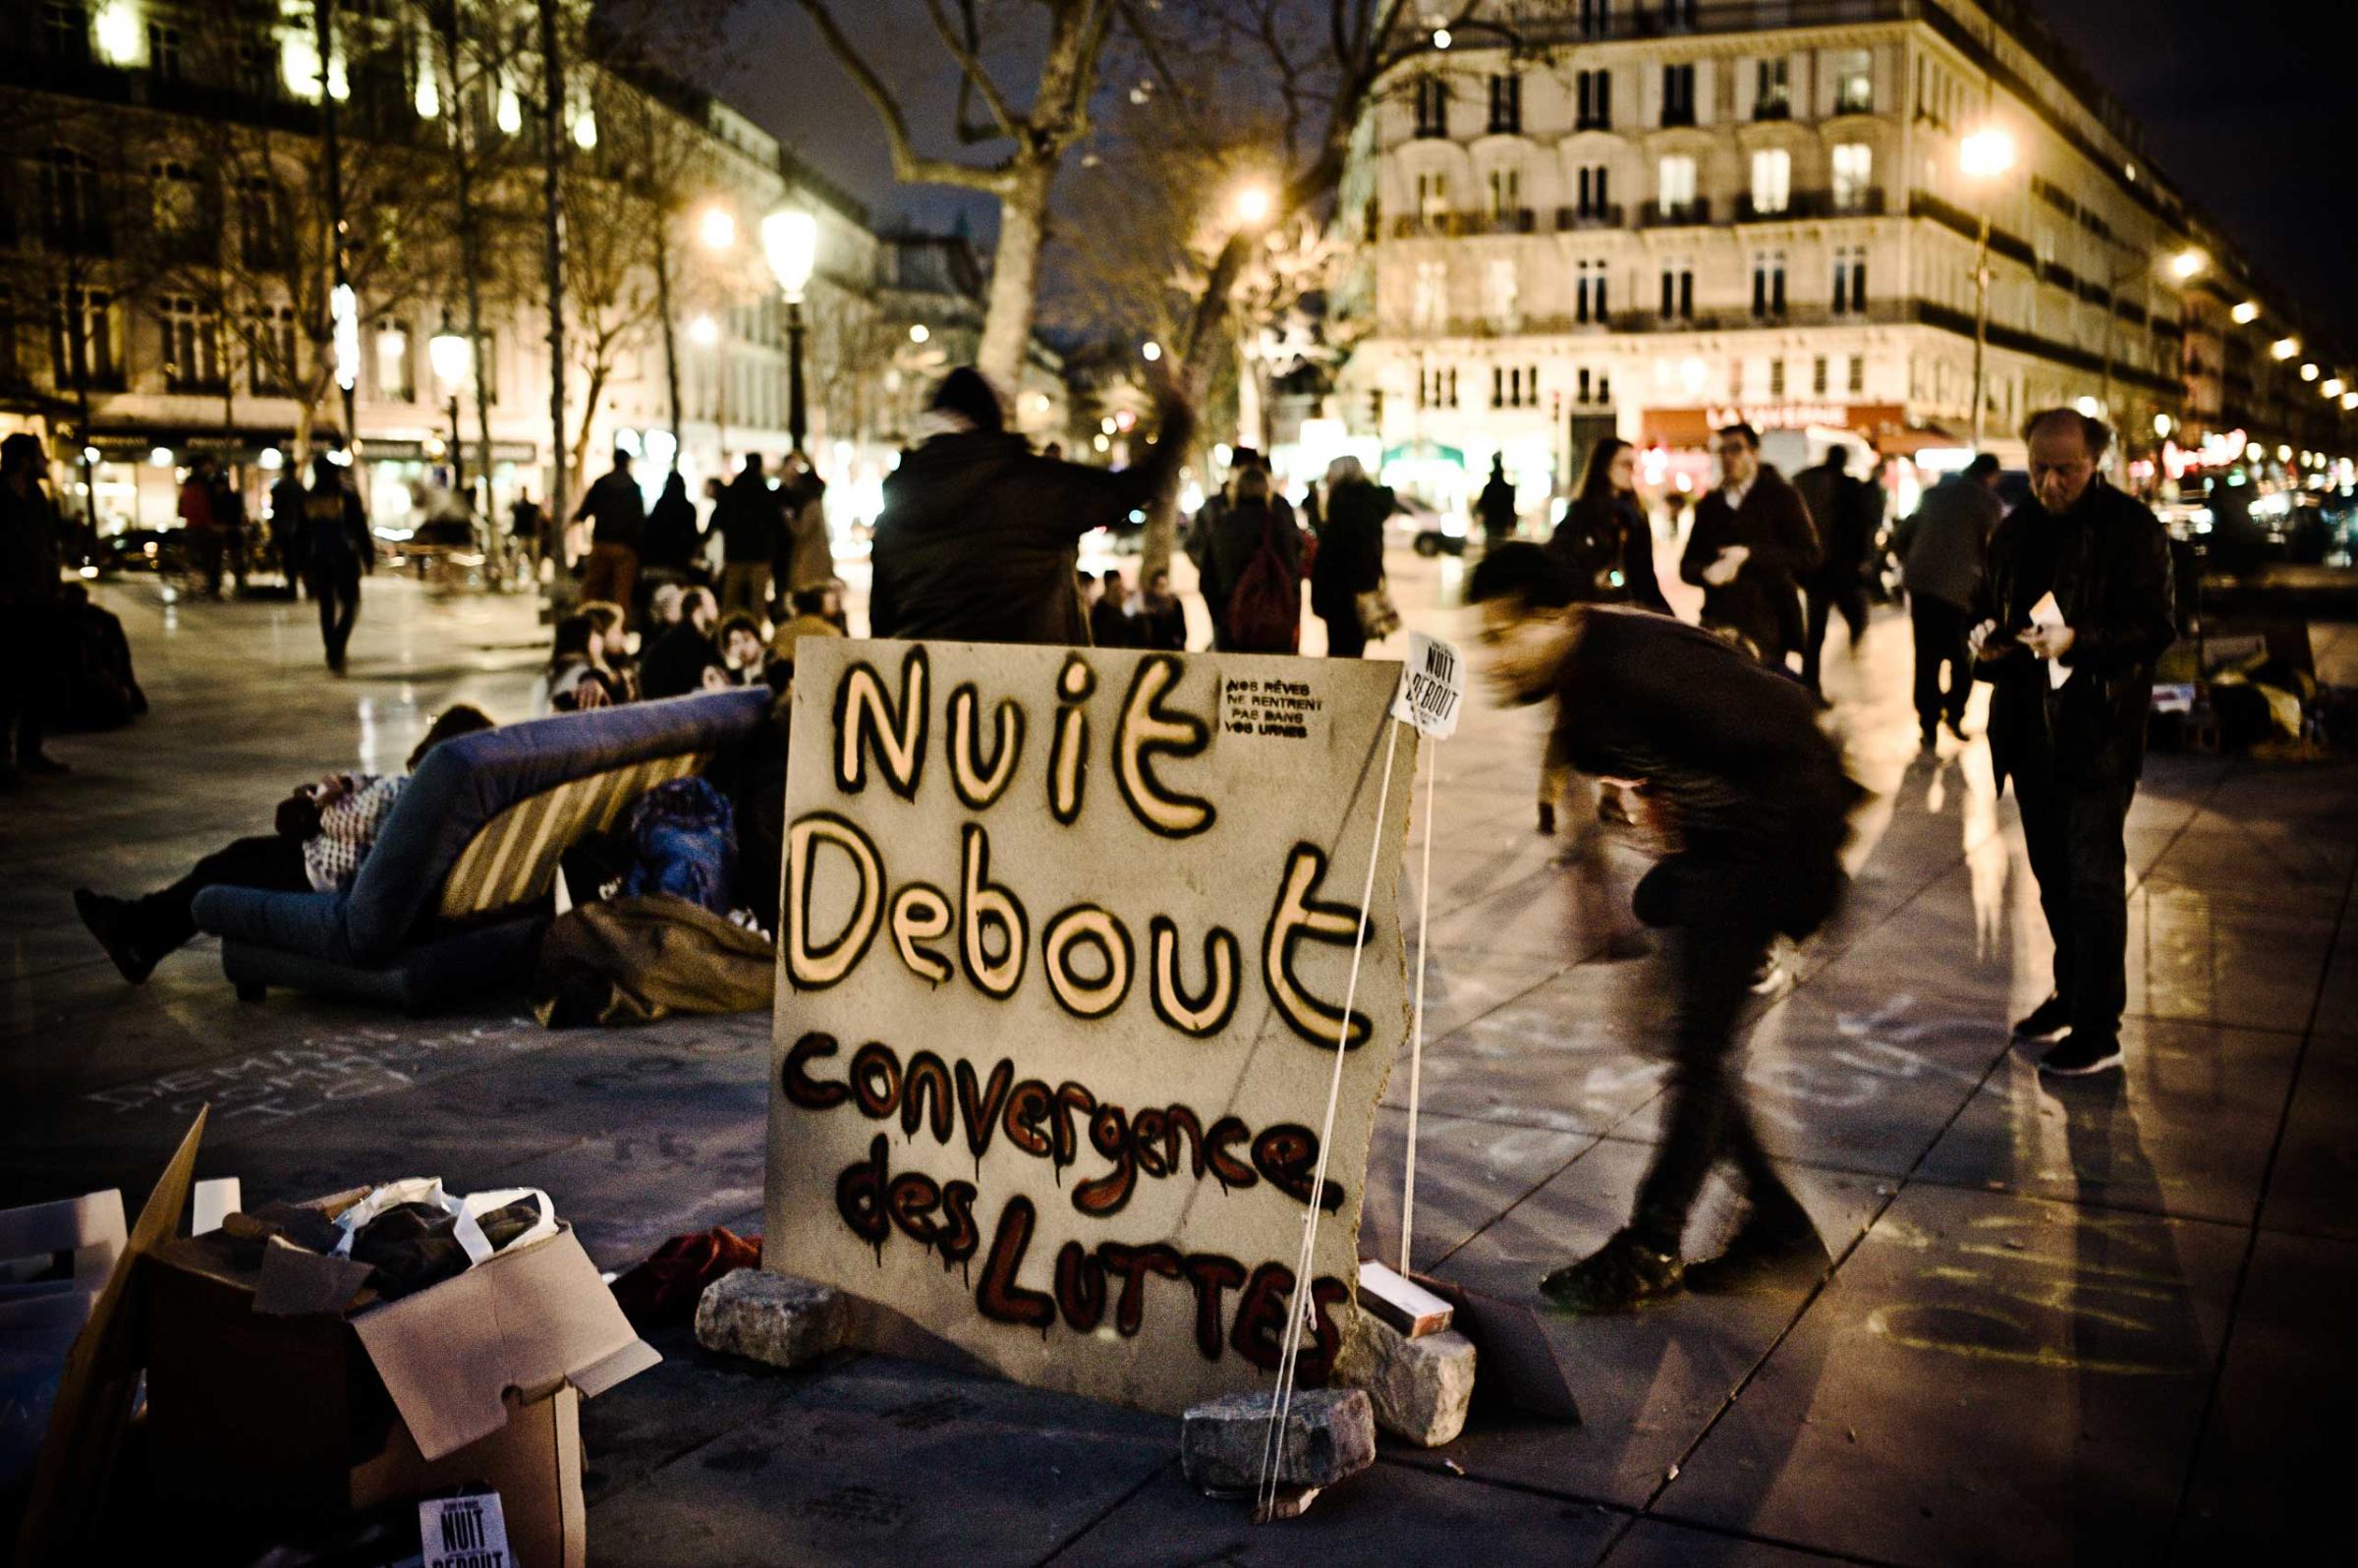 The movement of the Nuit Debout, loosely translated as “Standing Up at Night”, at the Place de la République in Paris, April 4, 2016.